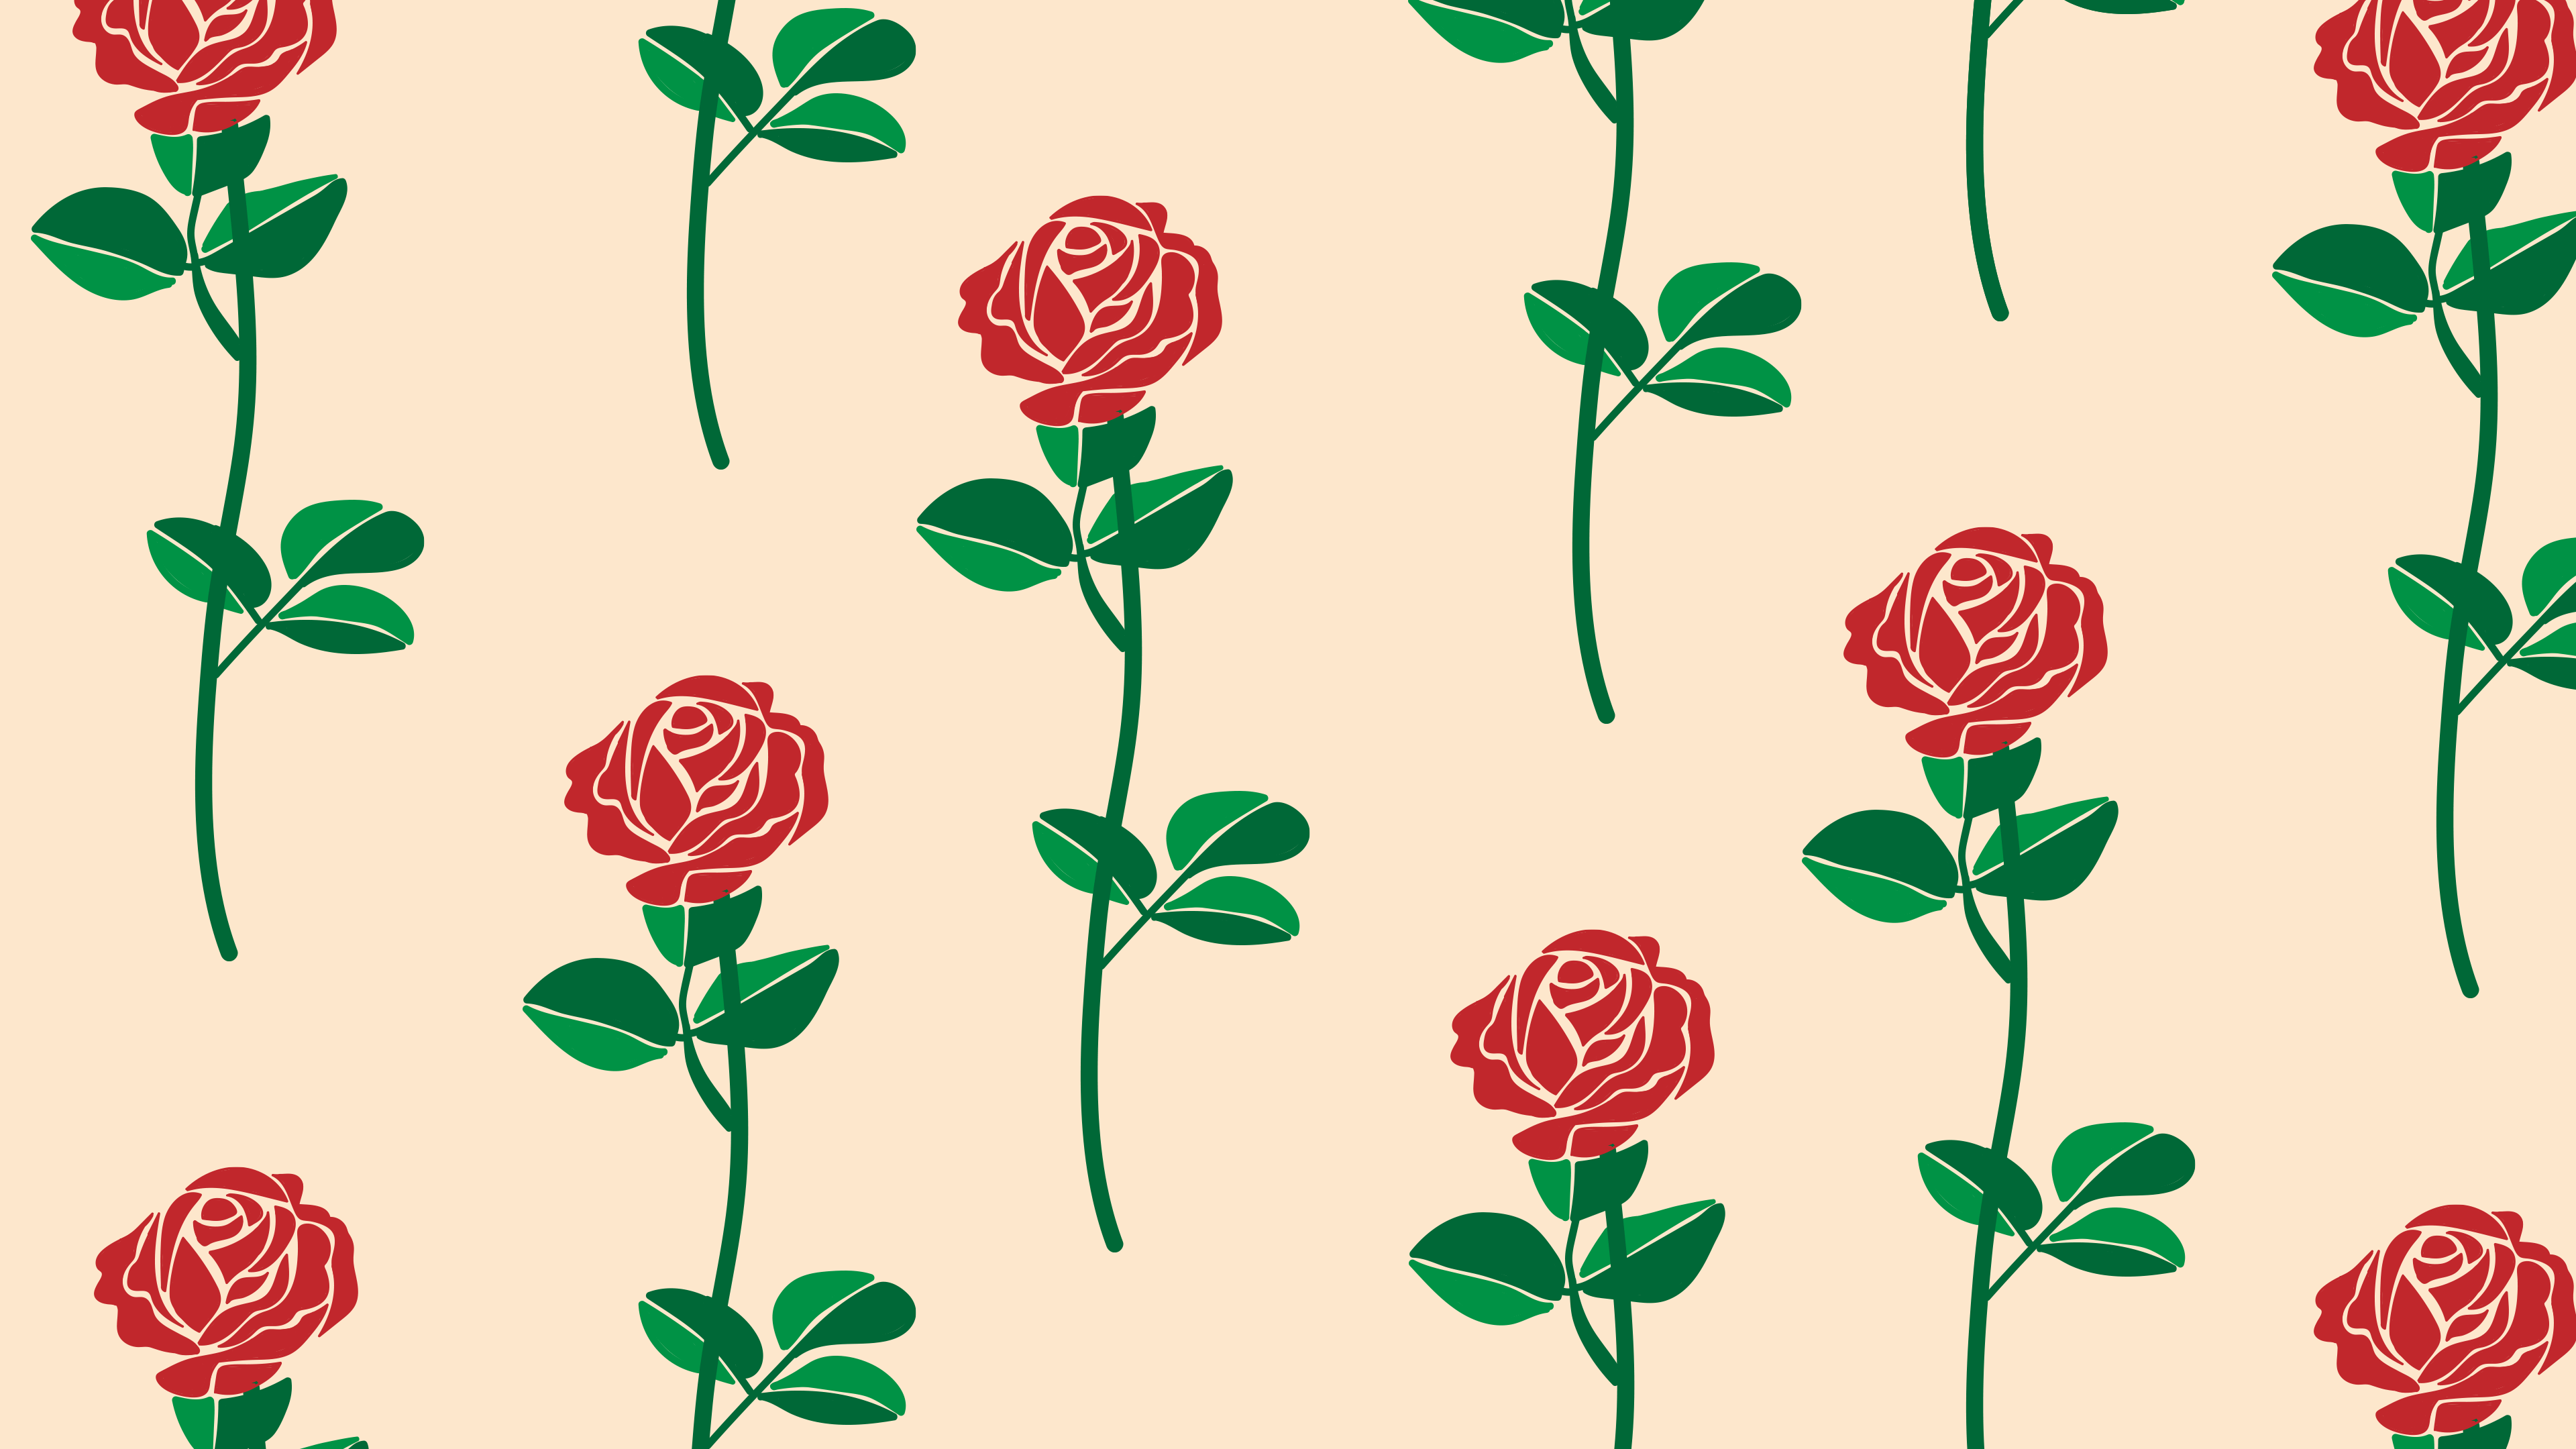 Roses against a tan background.